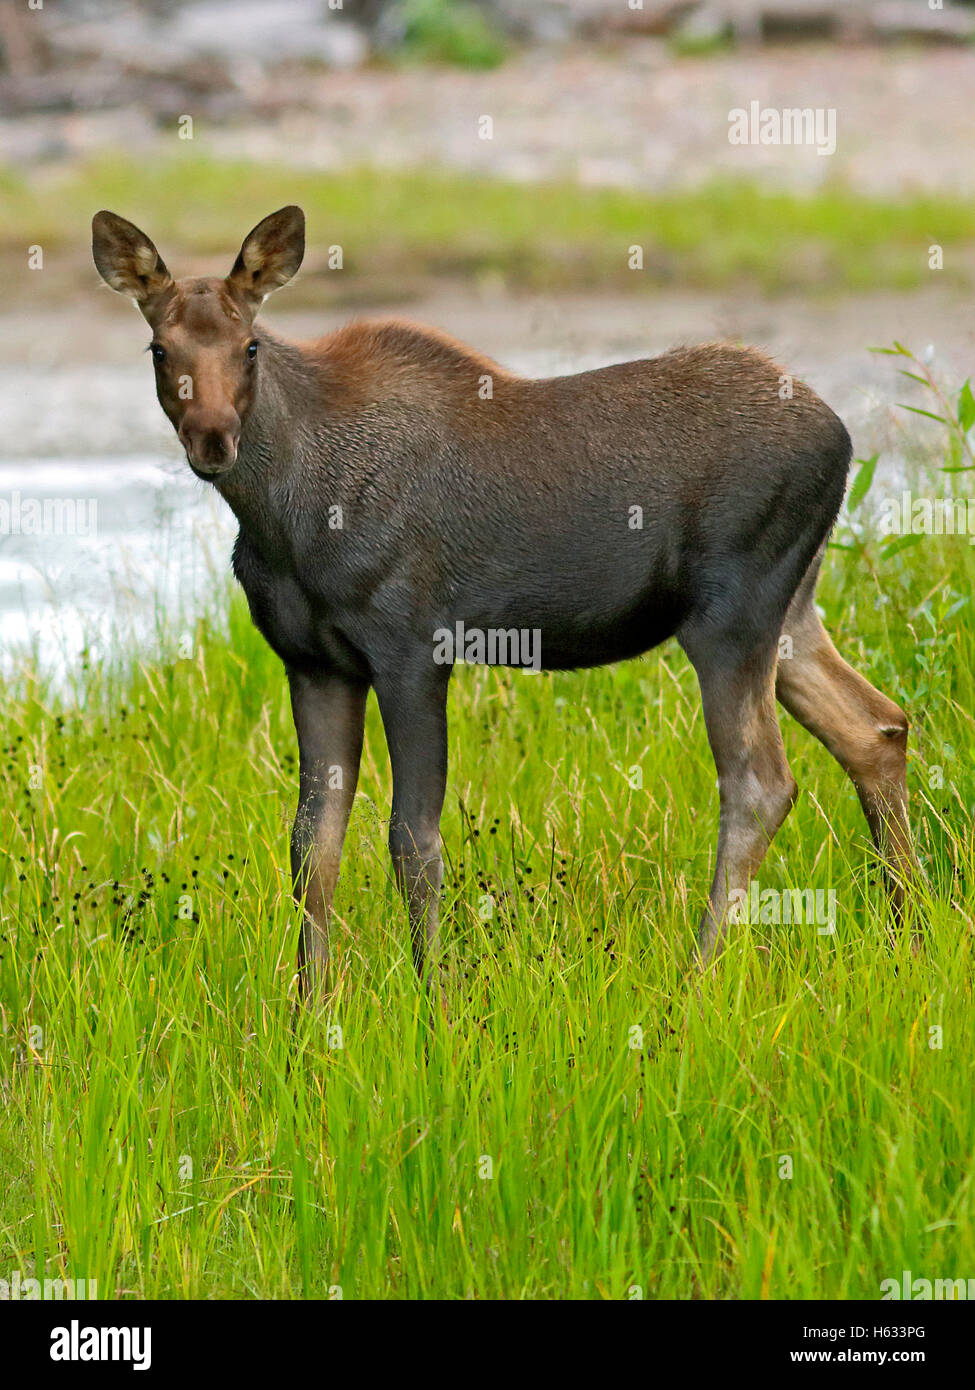 Baby Moose, few months old standing in grass by river. Stock Photo